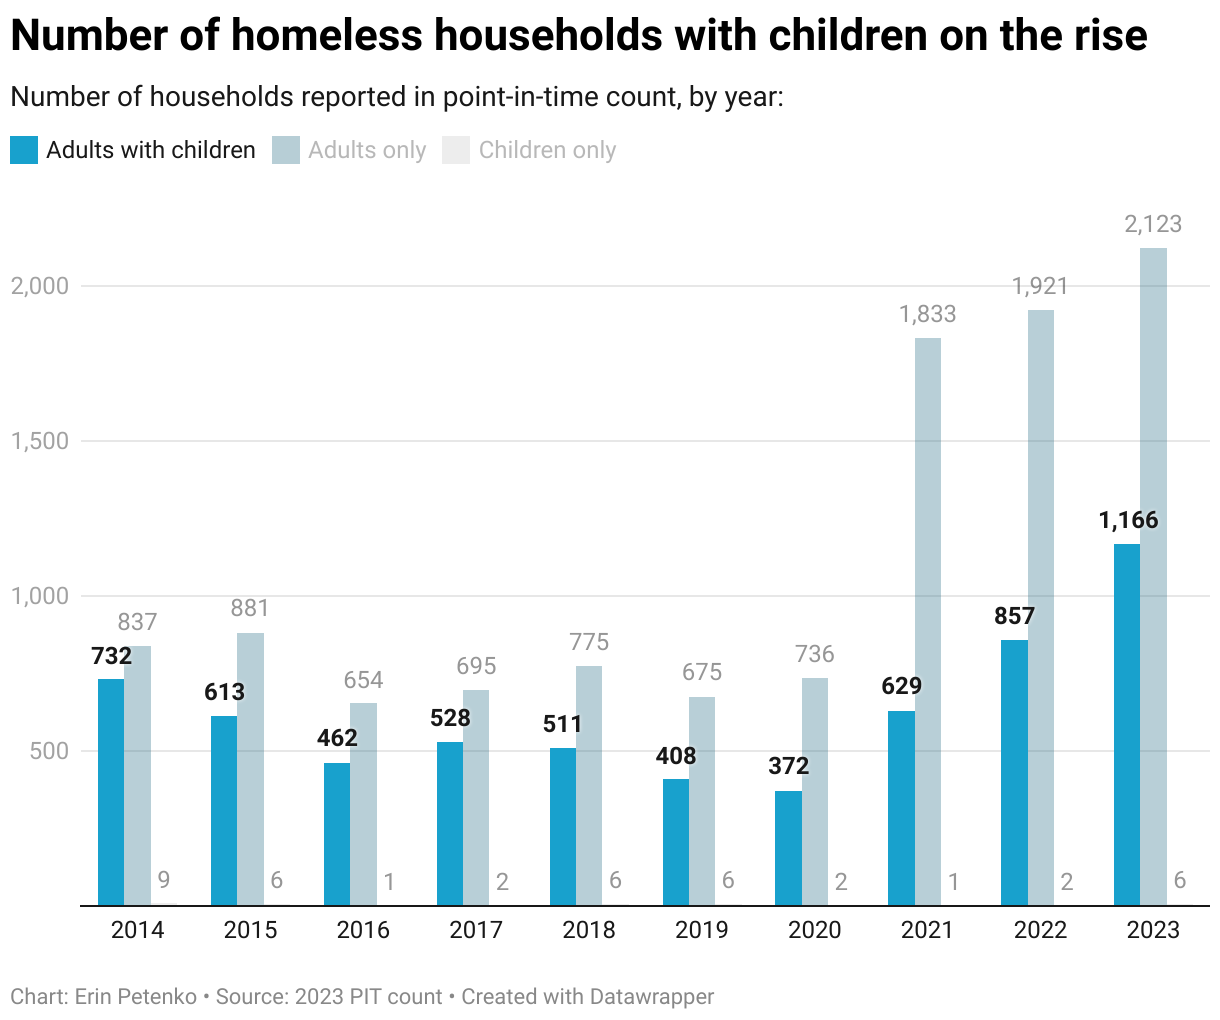 The state reported 1,166 homeless households with children in 2023, the highest in 10 years.